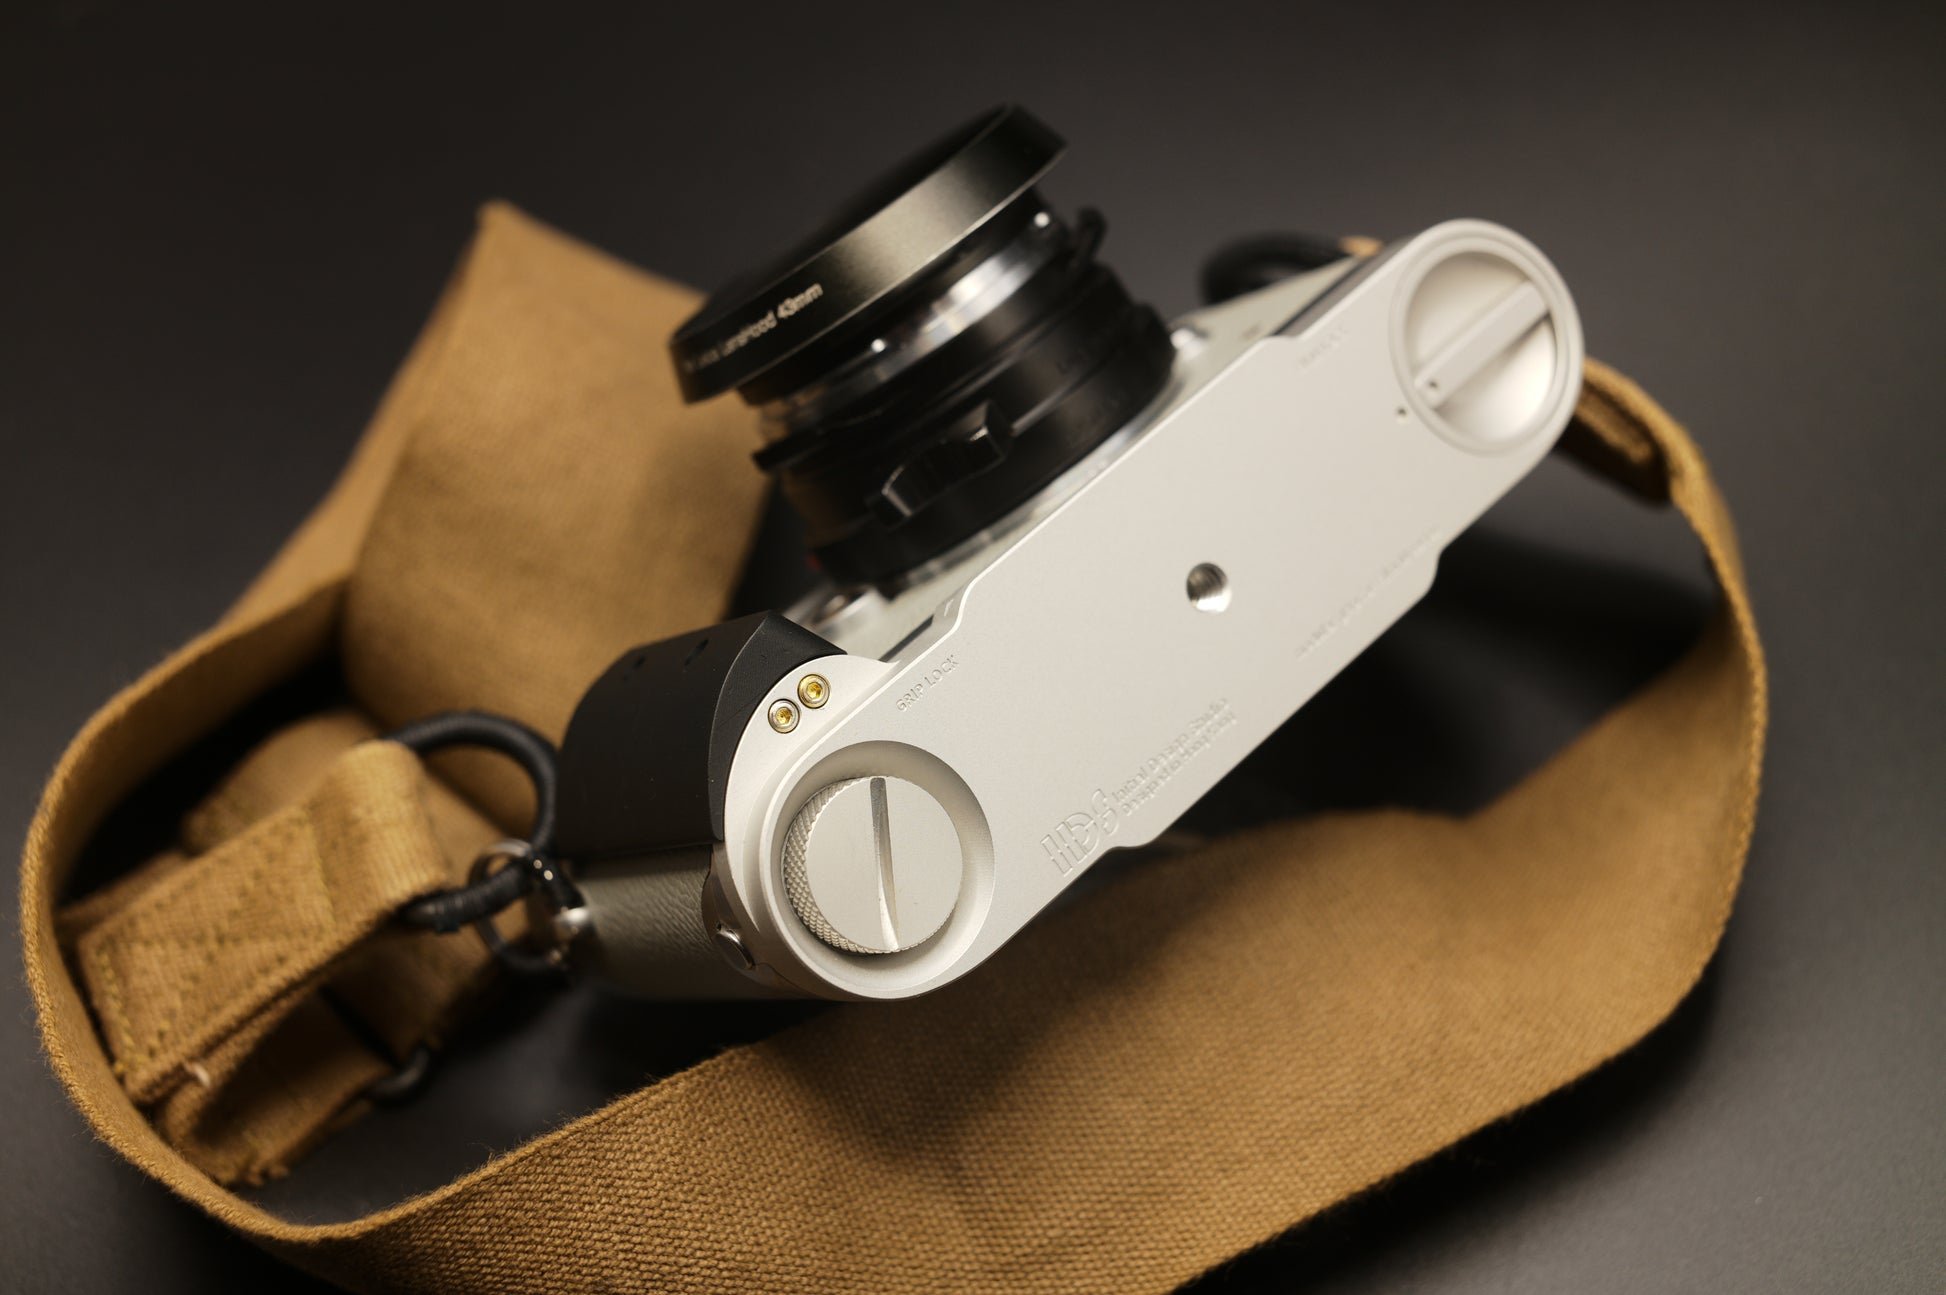 Leica Grip for Film camera from IDSworks